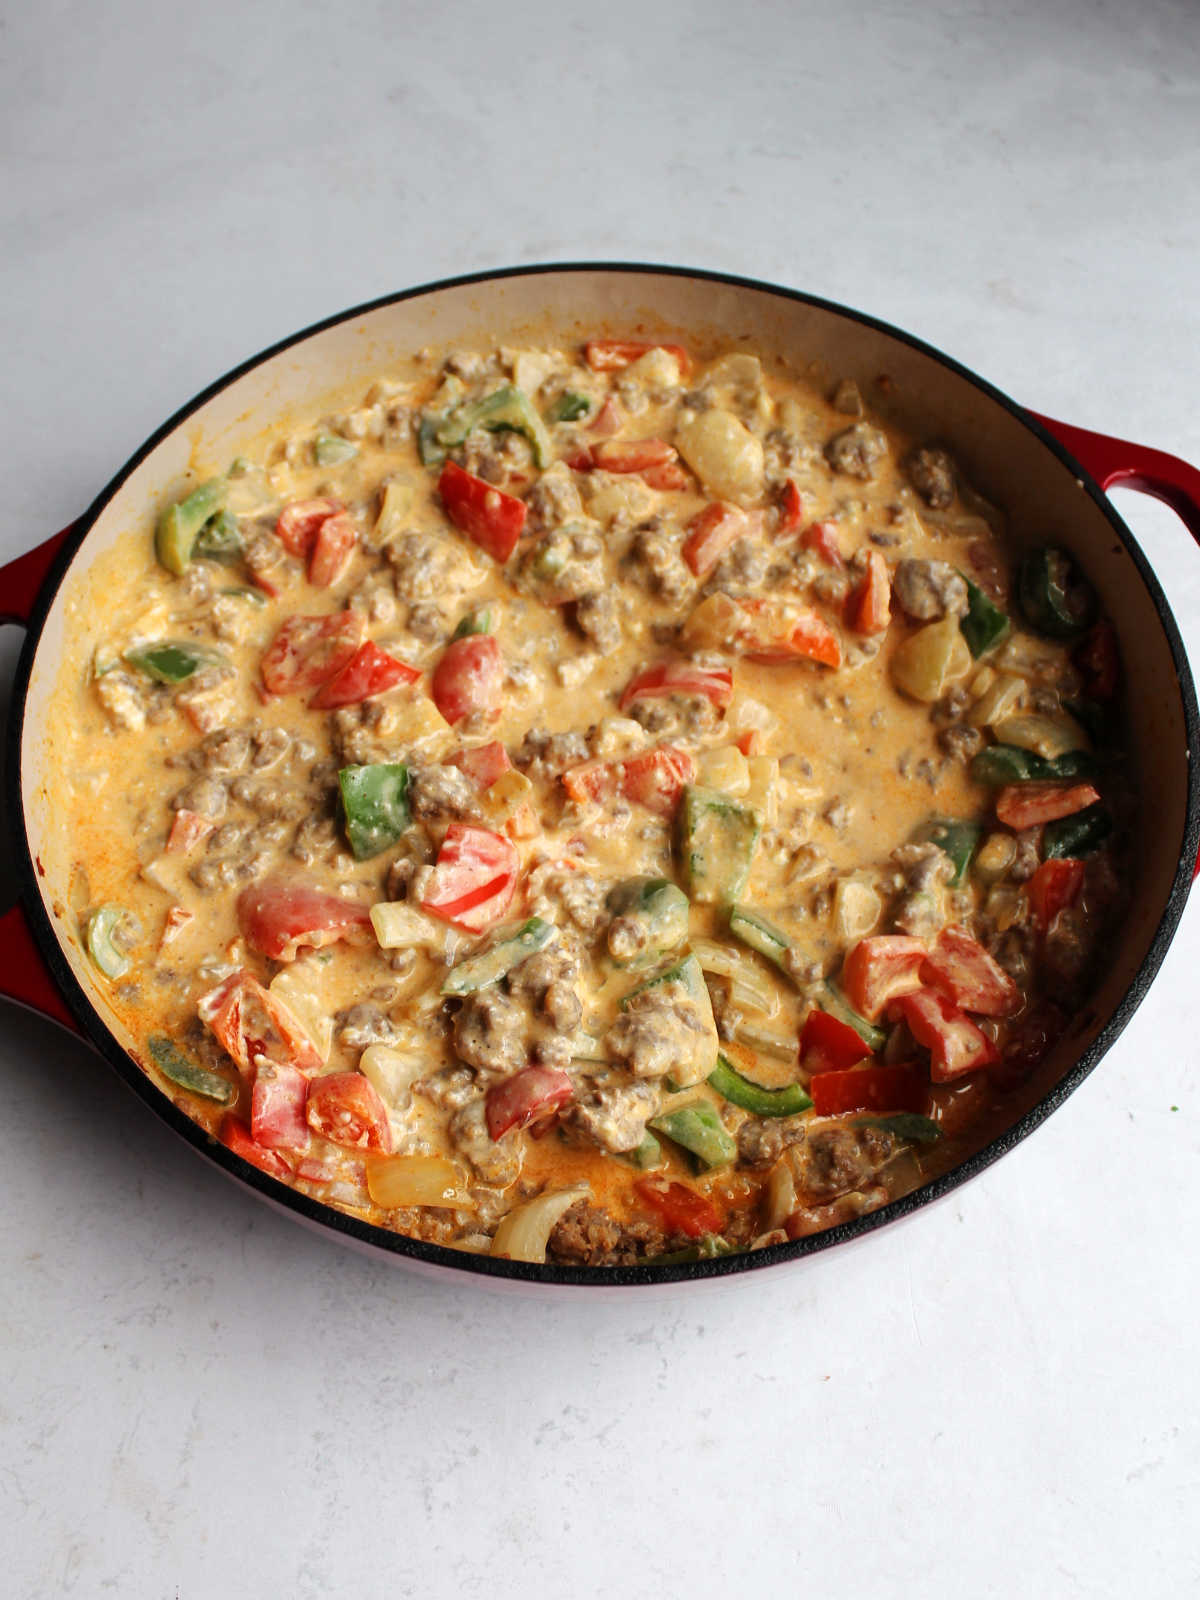 Creamy cheesy sauce with chorizo and vegetables in pan.